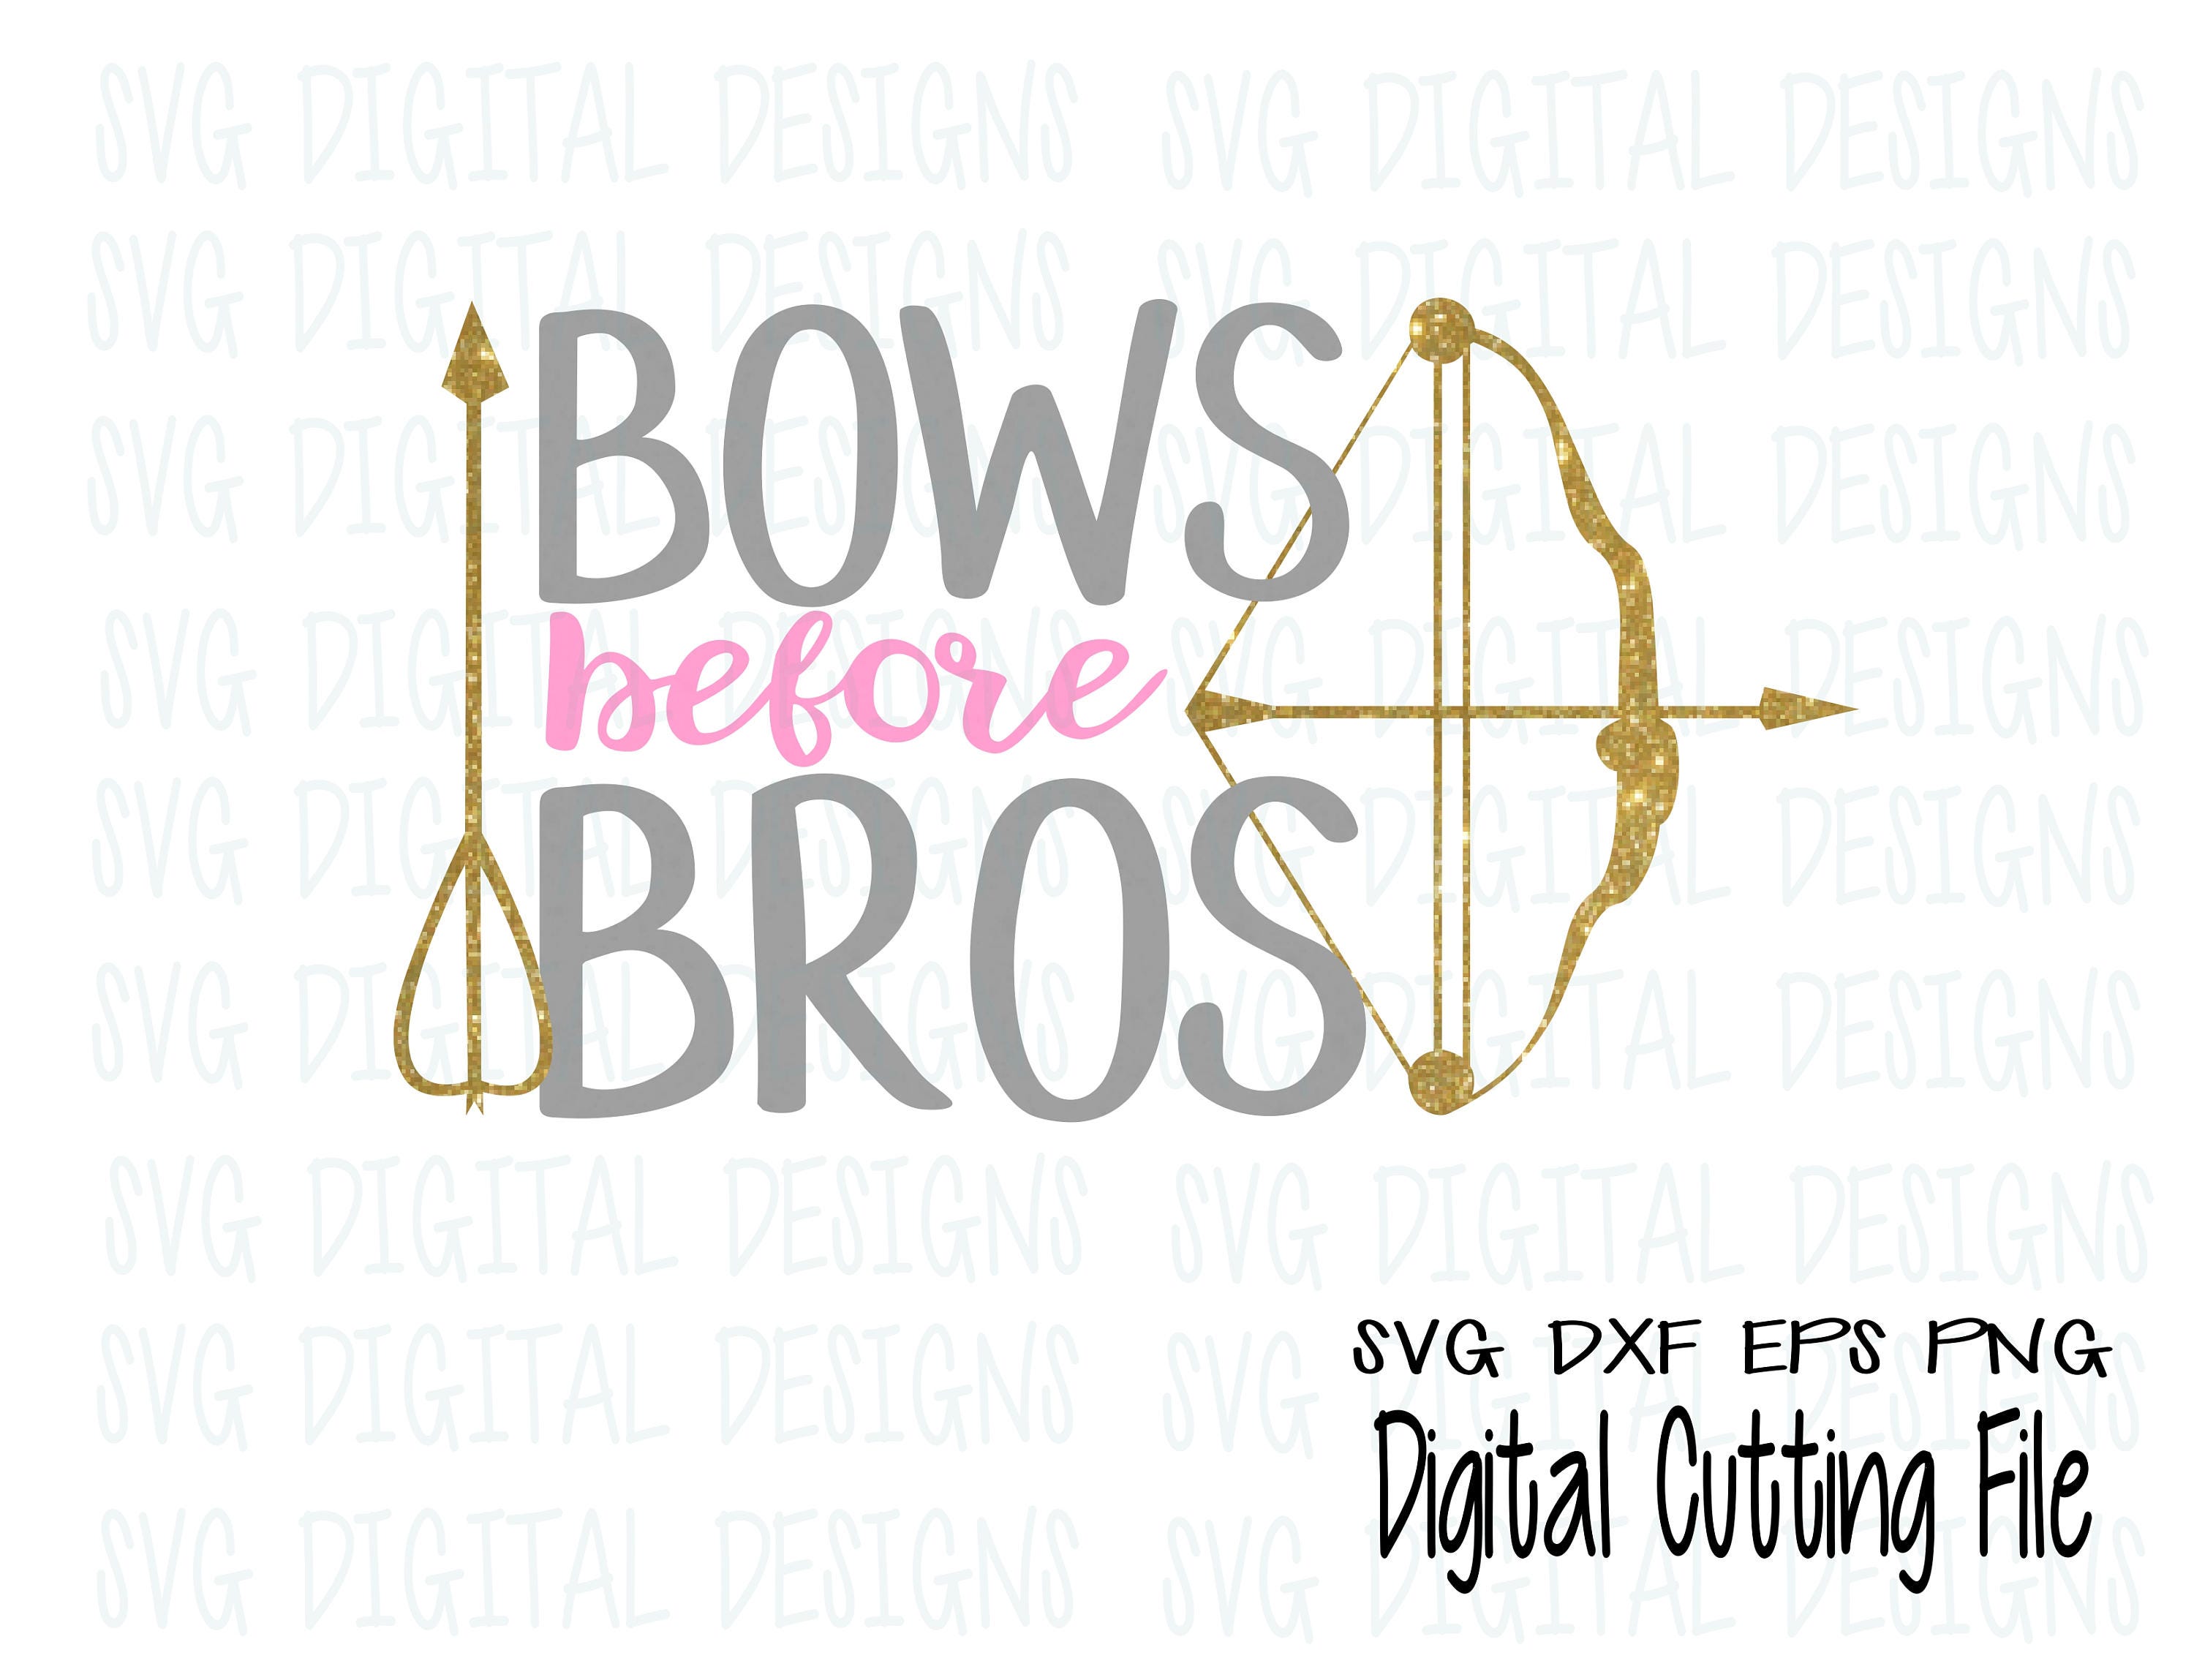 Download Bows Before Bros Archery SVG Cut File Design Crossbow and